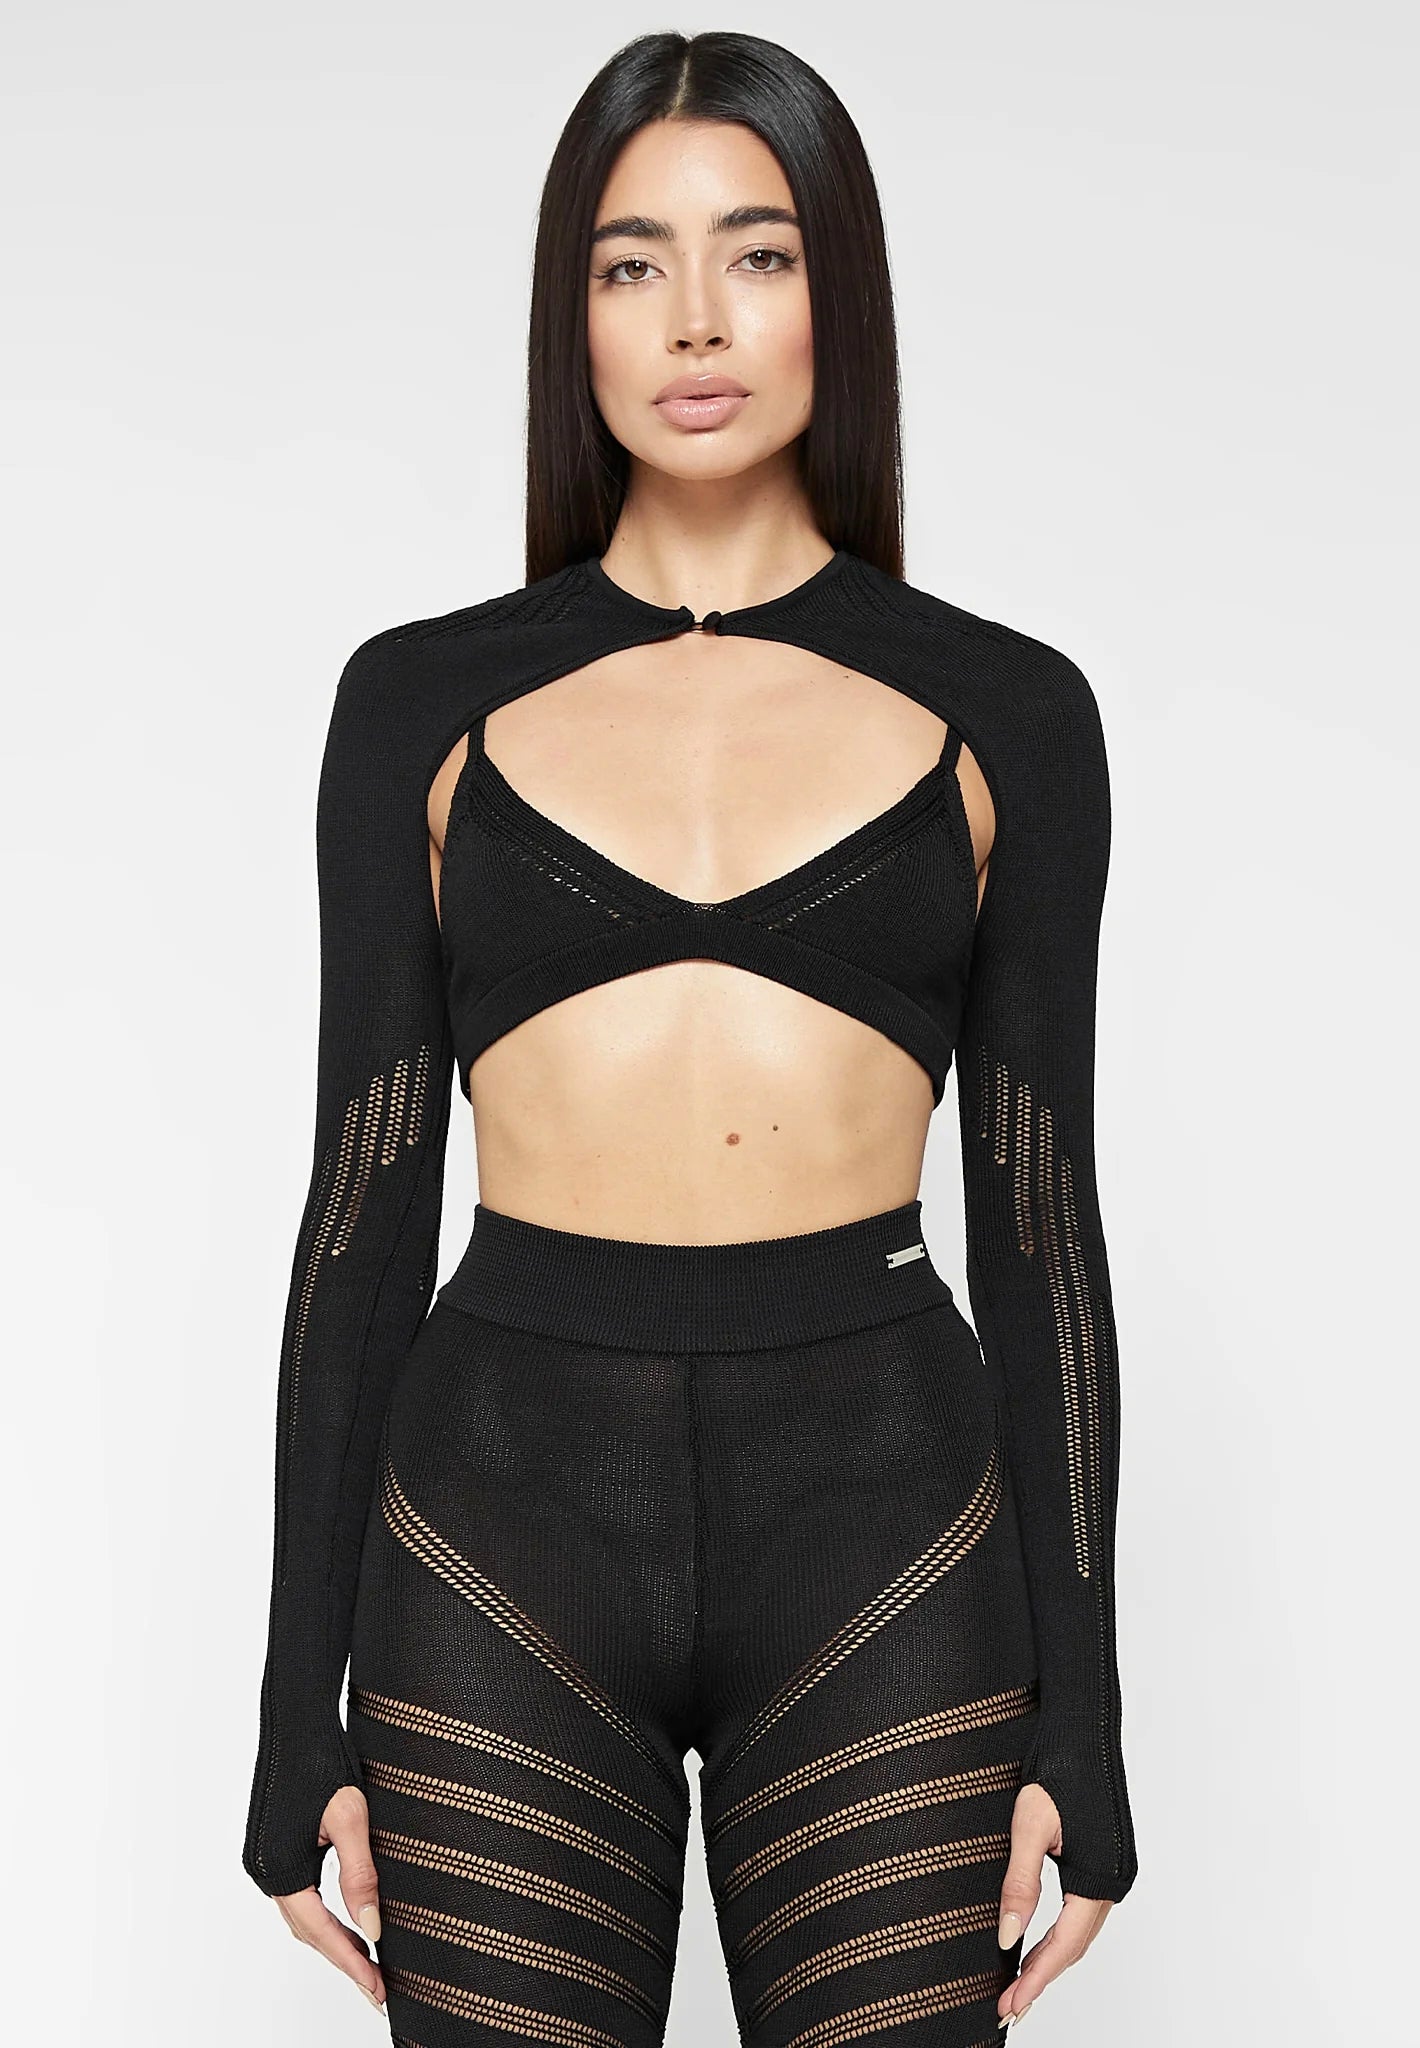 Knitted Sleeve Overlay with Bralette - Black